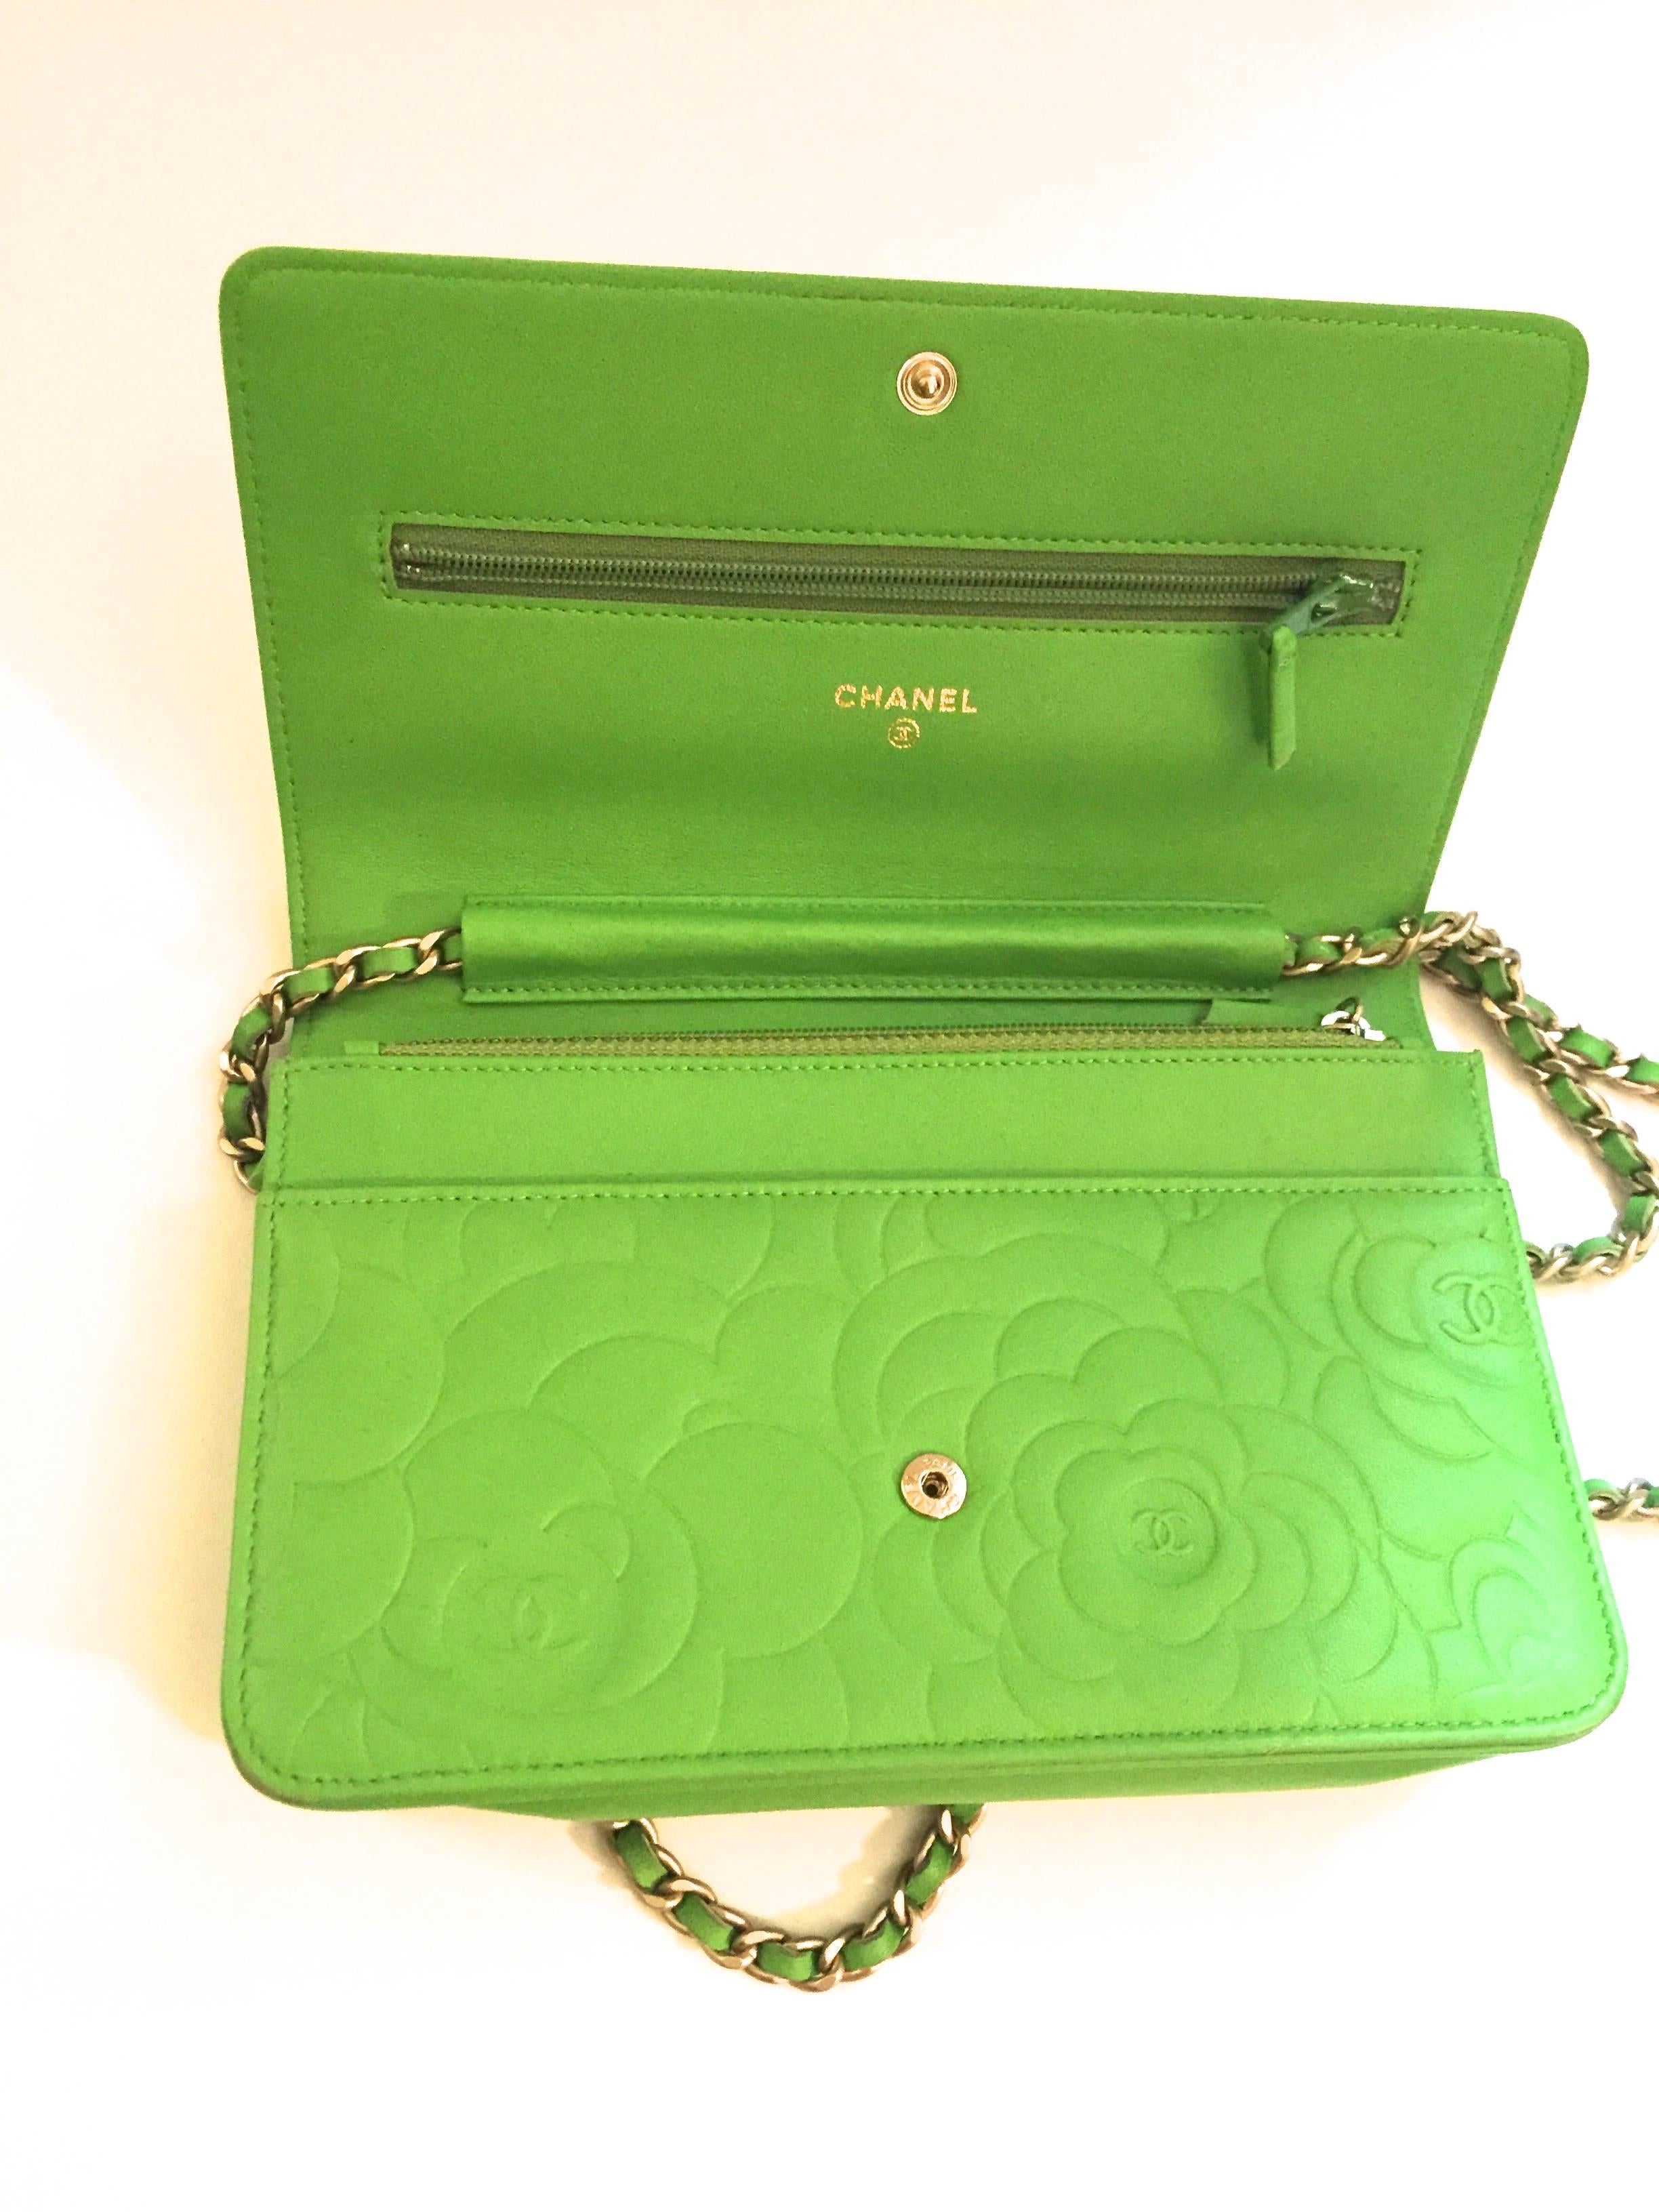 New Chanel Wallet on a Chain - Lambskin - Green with Embossed Camellias 3